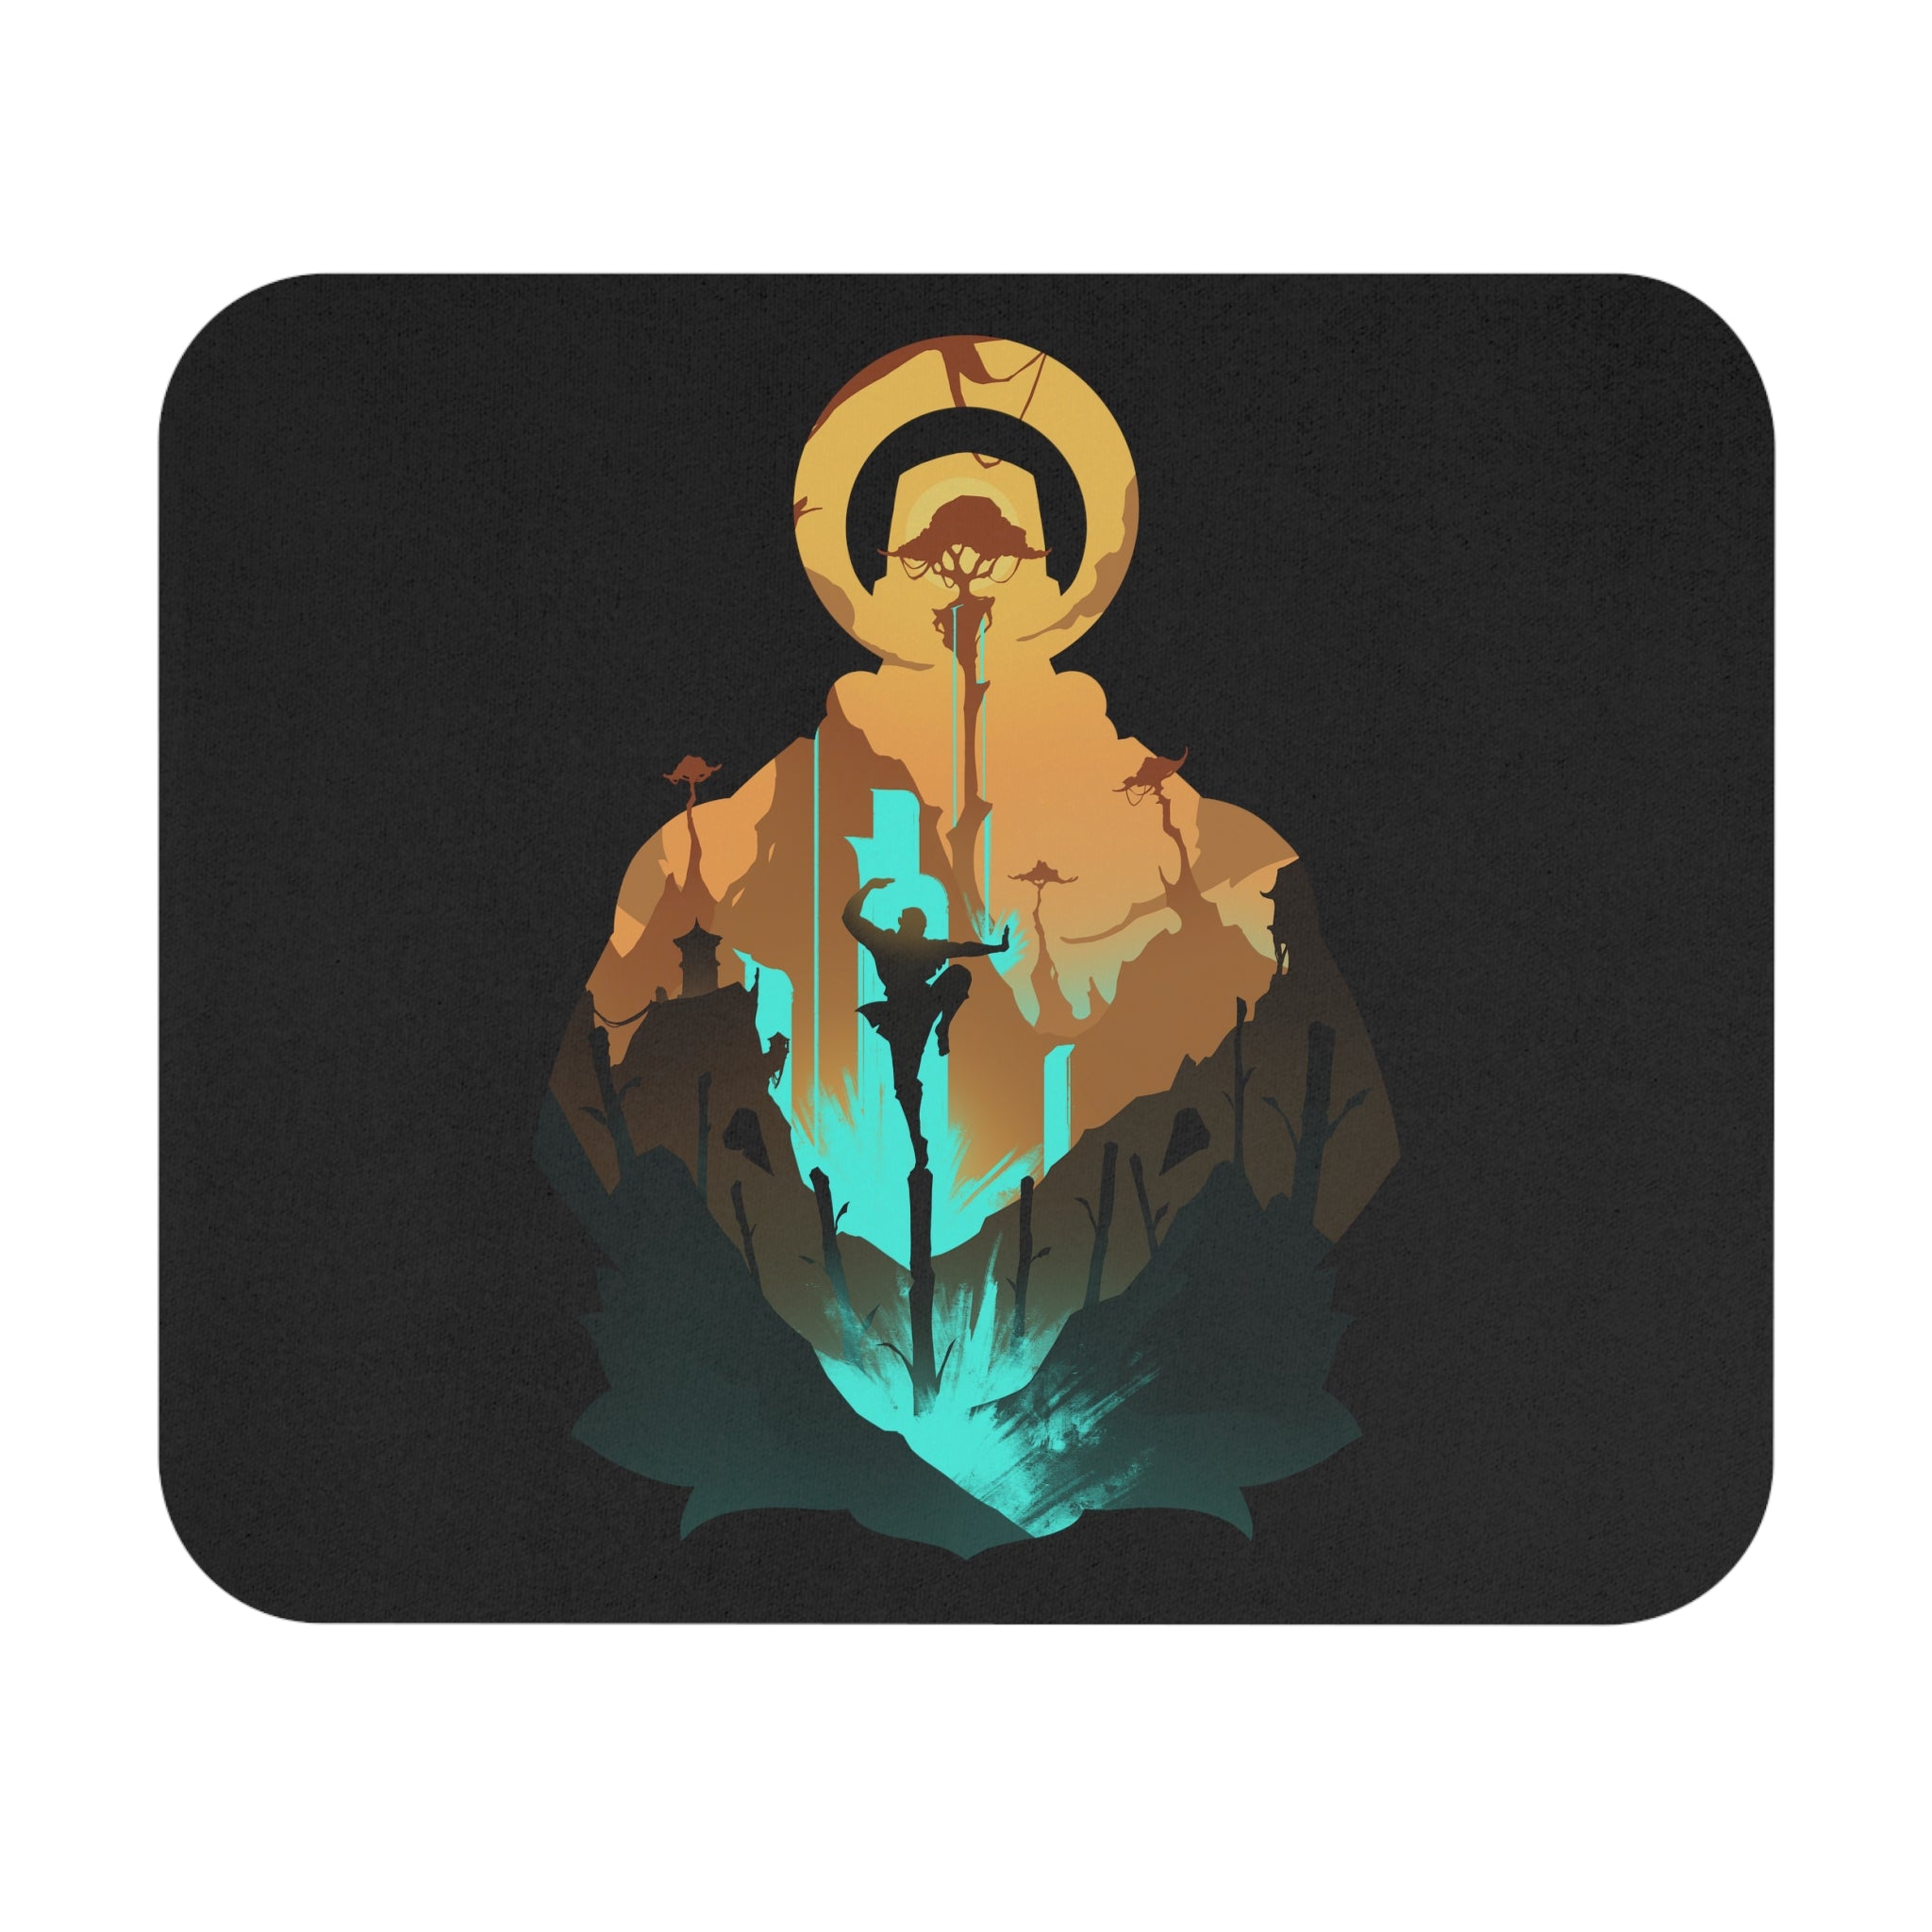 MONK CLASS SILHOUETTE RECTANGLER MOUSE PAD